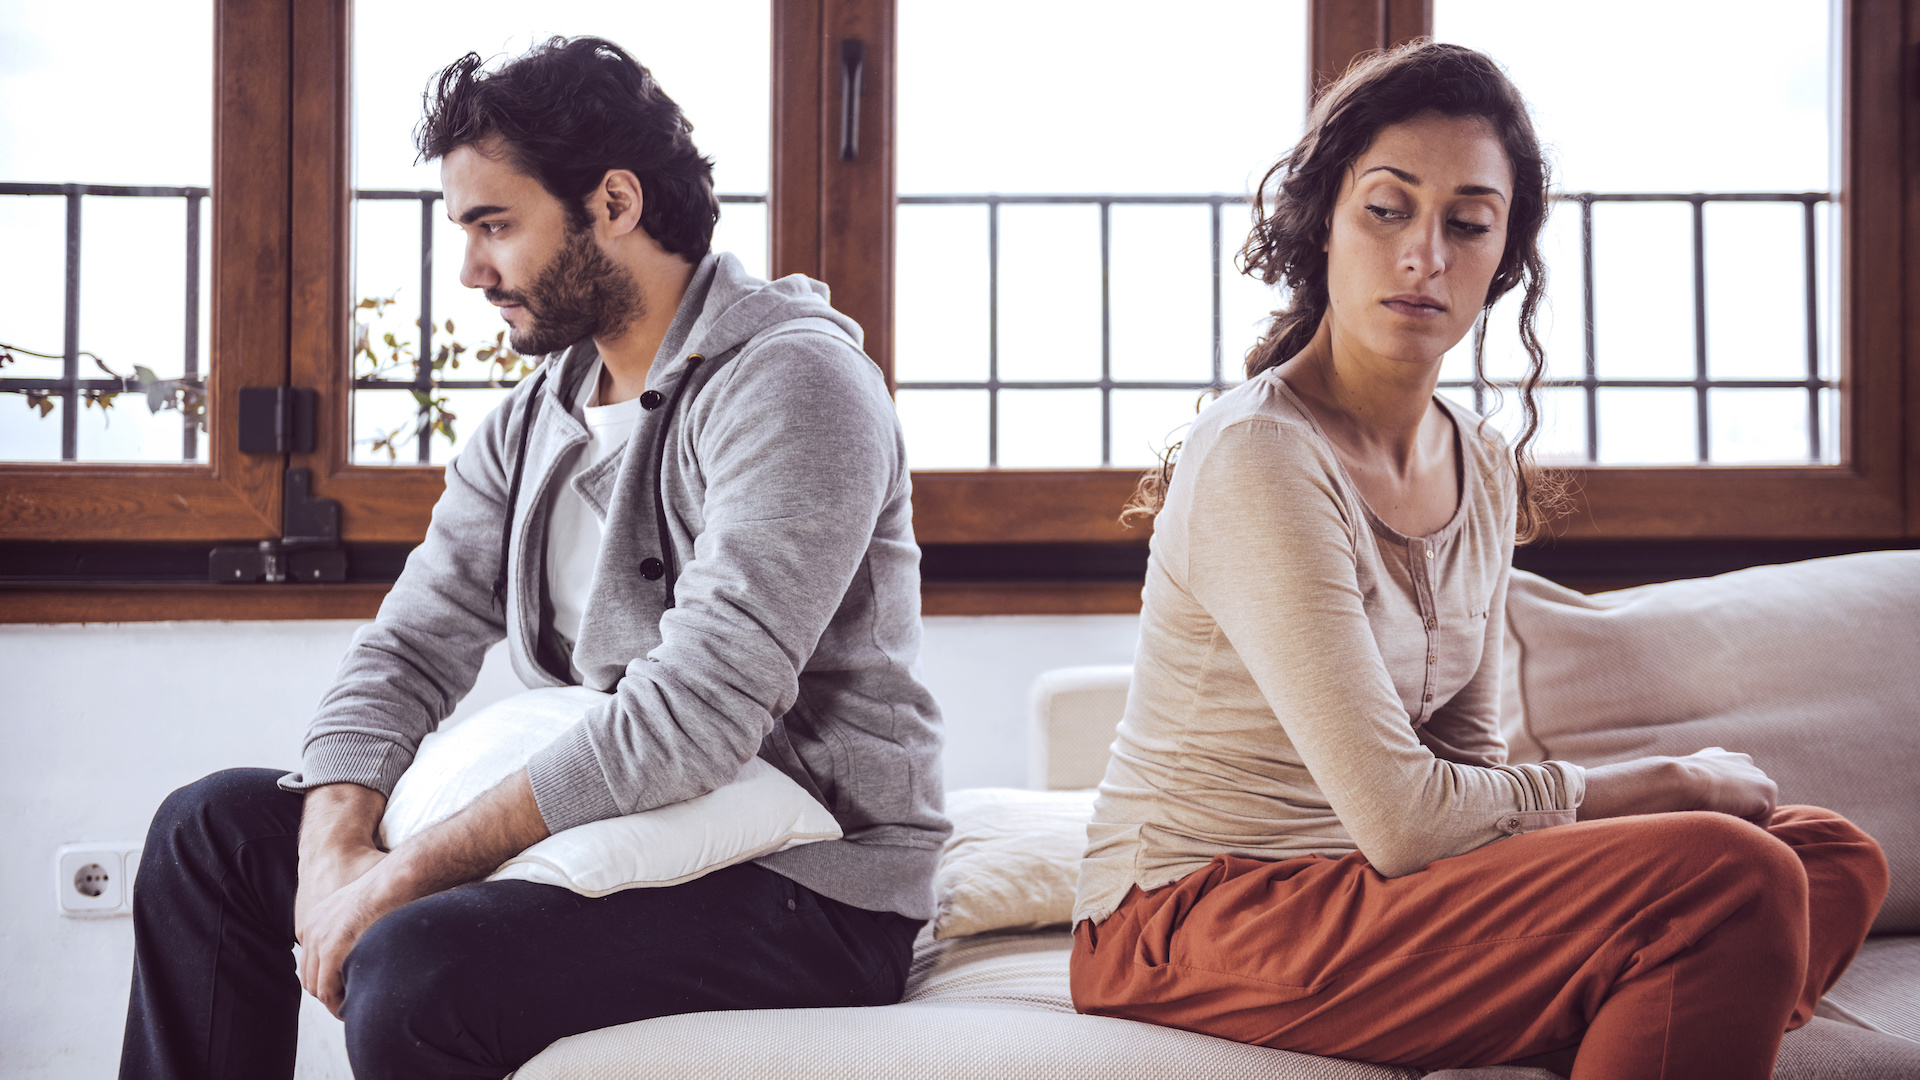 Divorce versus Separation: What's The Difference?